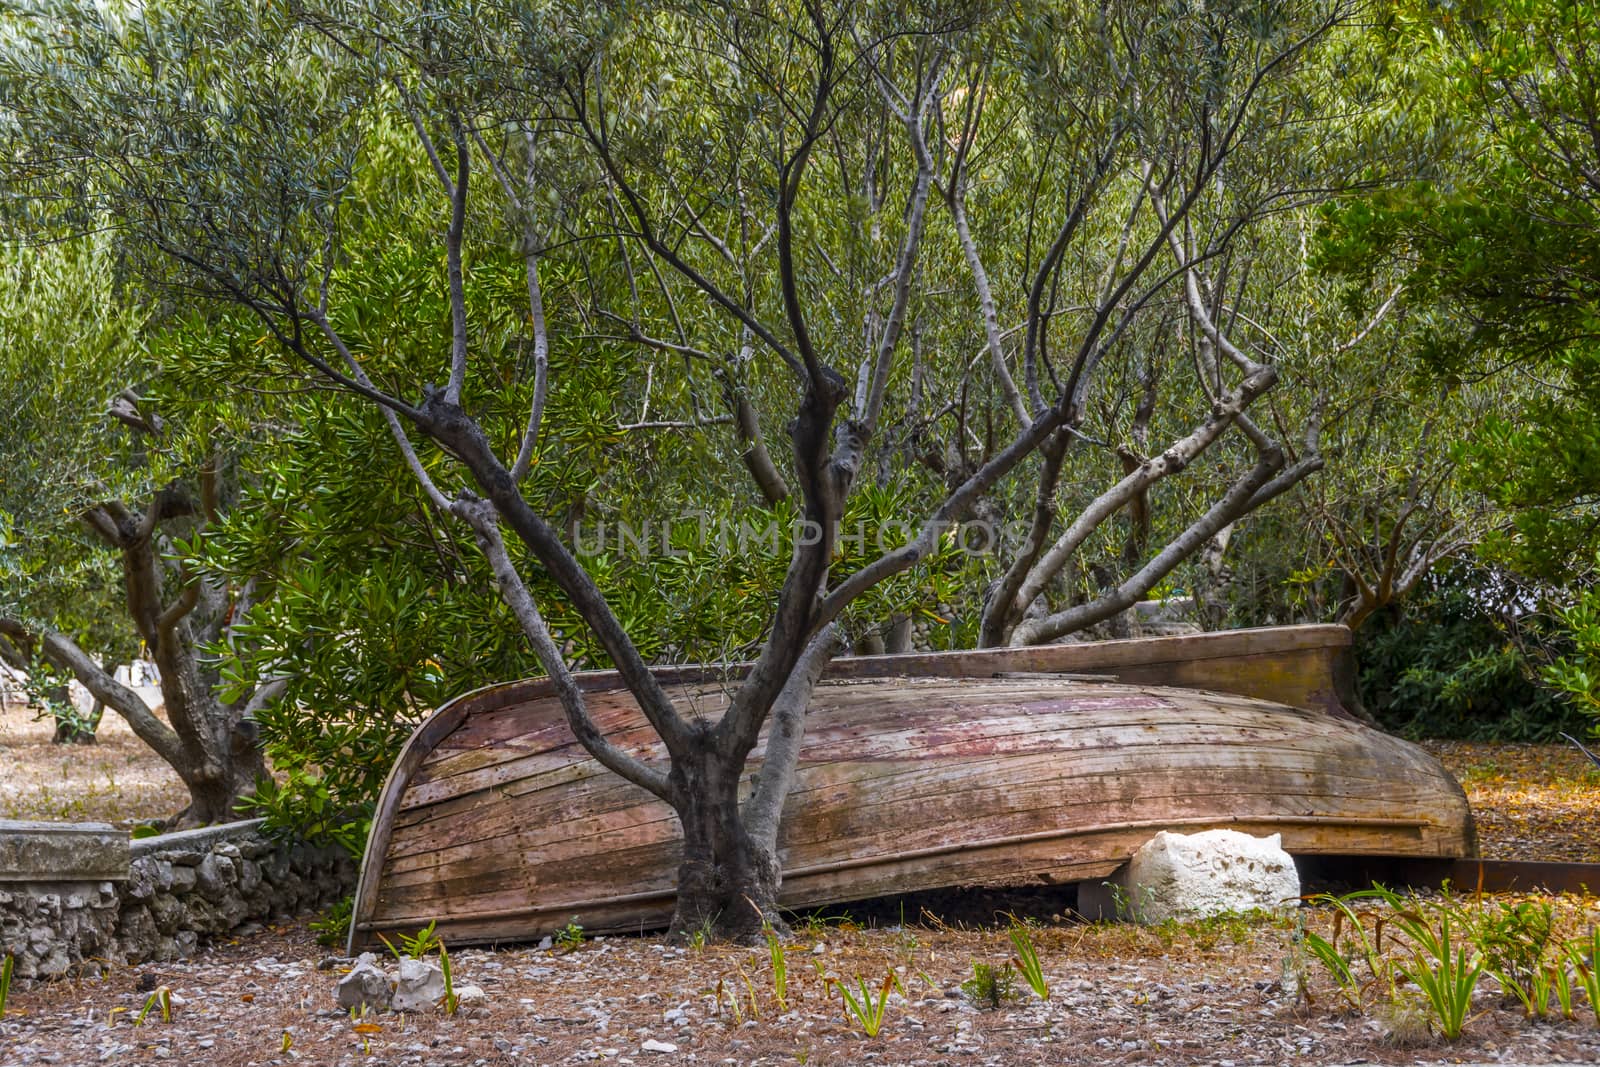 Abandoned old woodedn boat with stripped paint below bushes and trees waiting for restoration